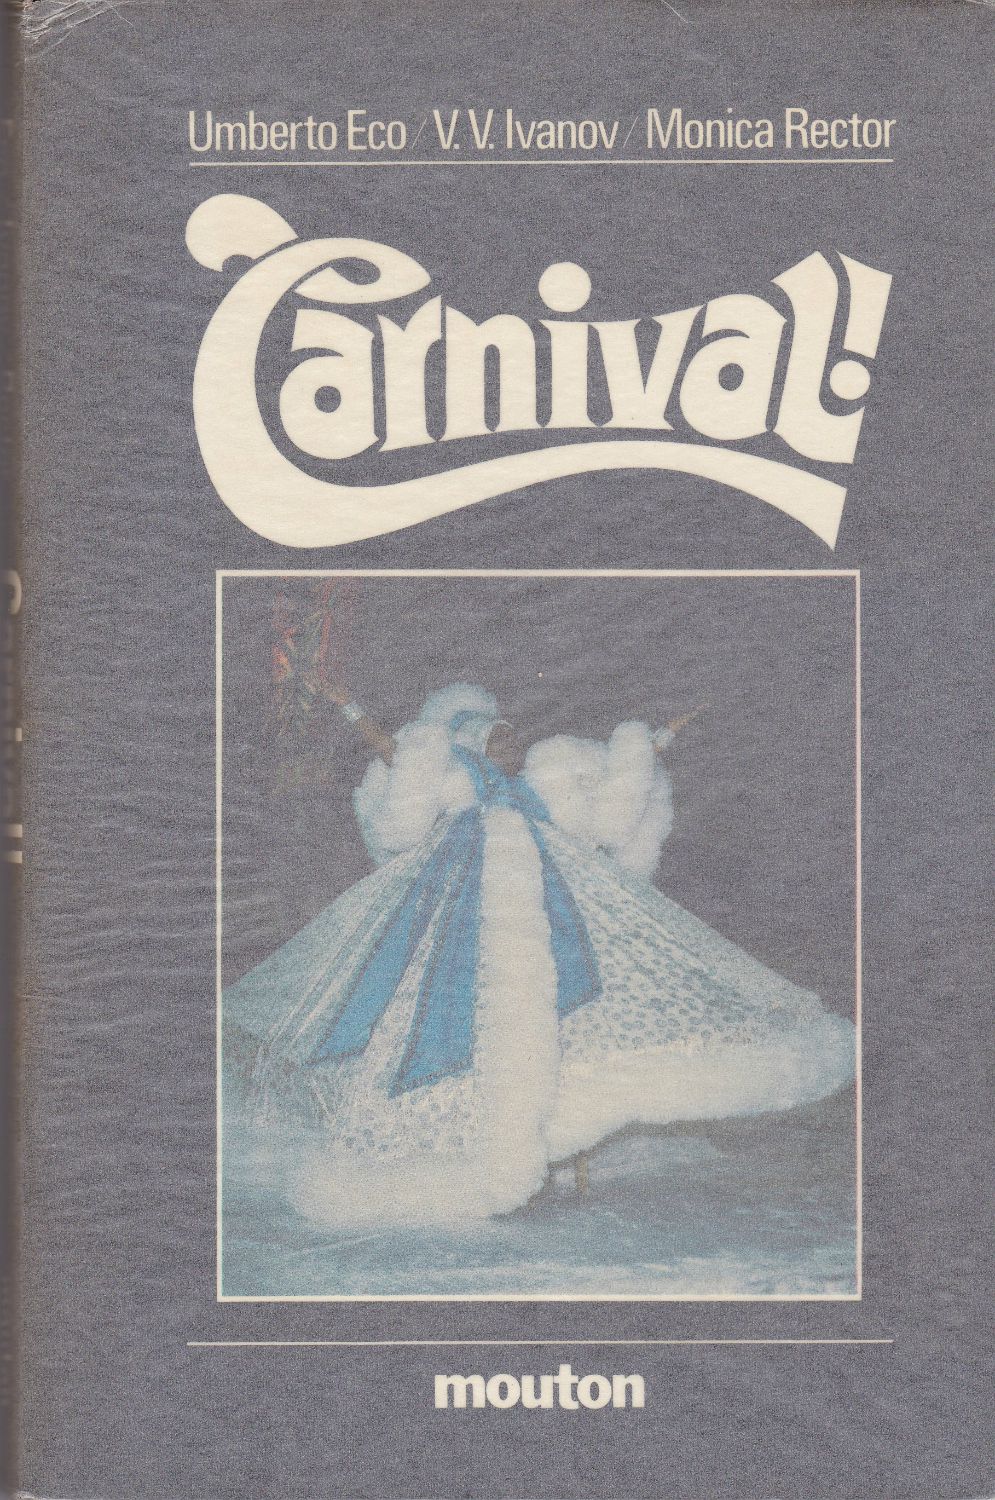 Carnival! (Approaches to semiotics ; 64)